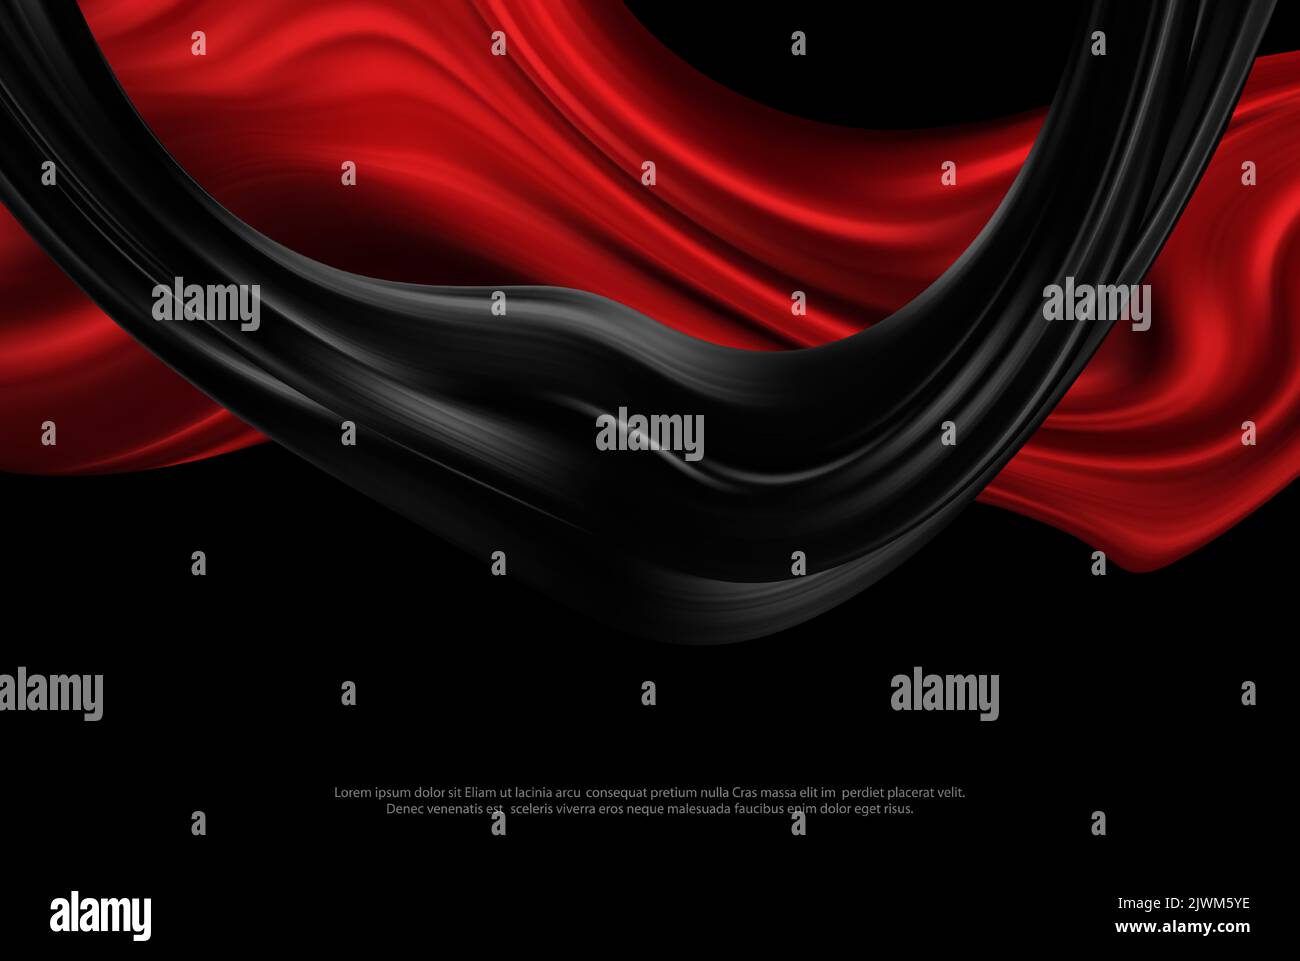 Wavy fabric in red and black. Abstract luxury background. Draped silky textile. Decoration for the design of posters, banners, placards, web design. Stock Vector